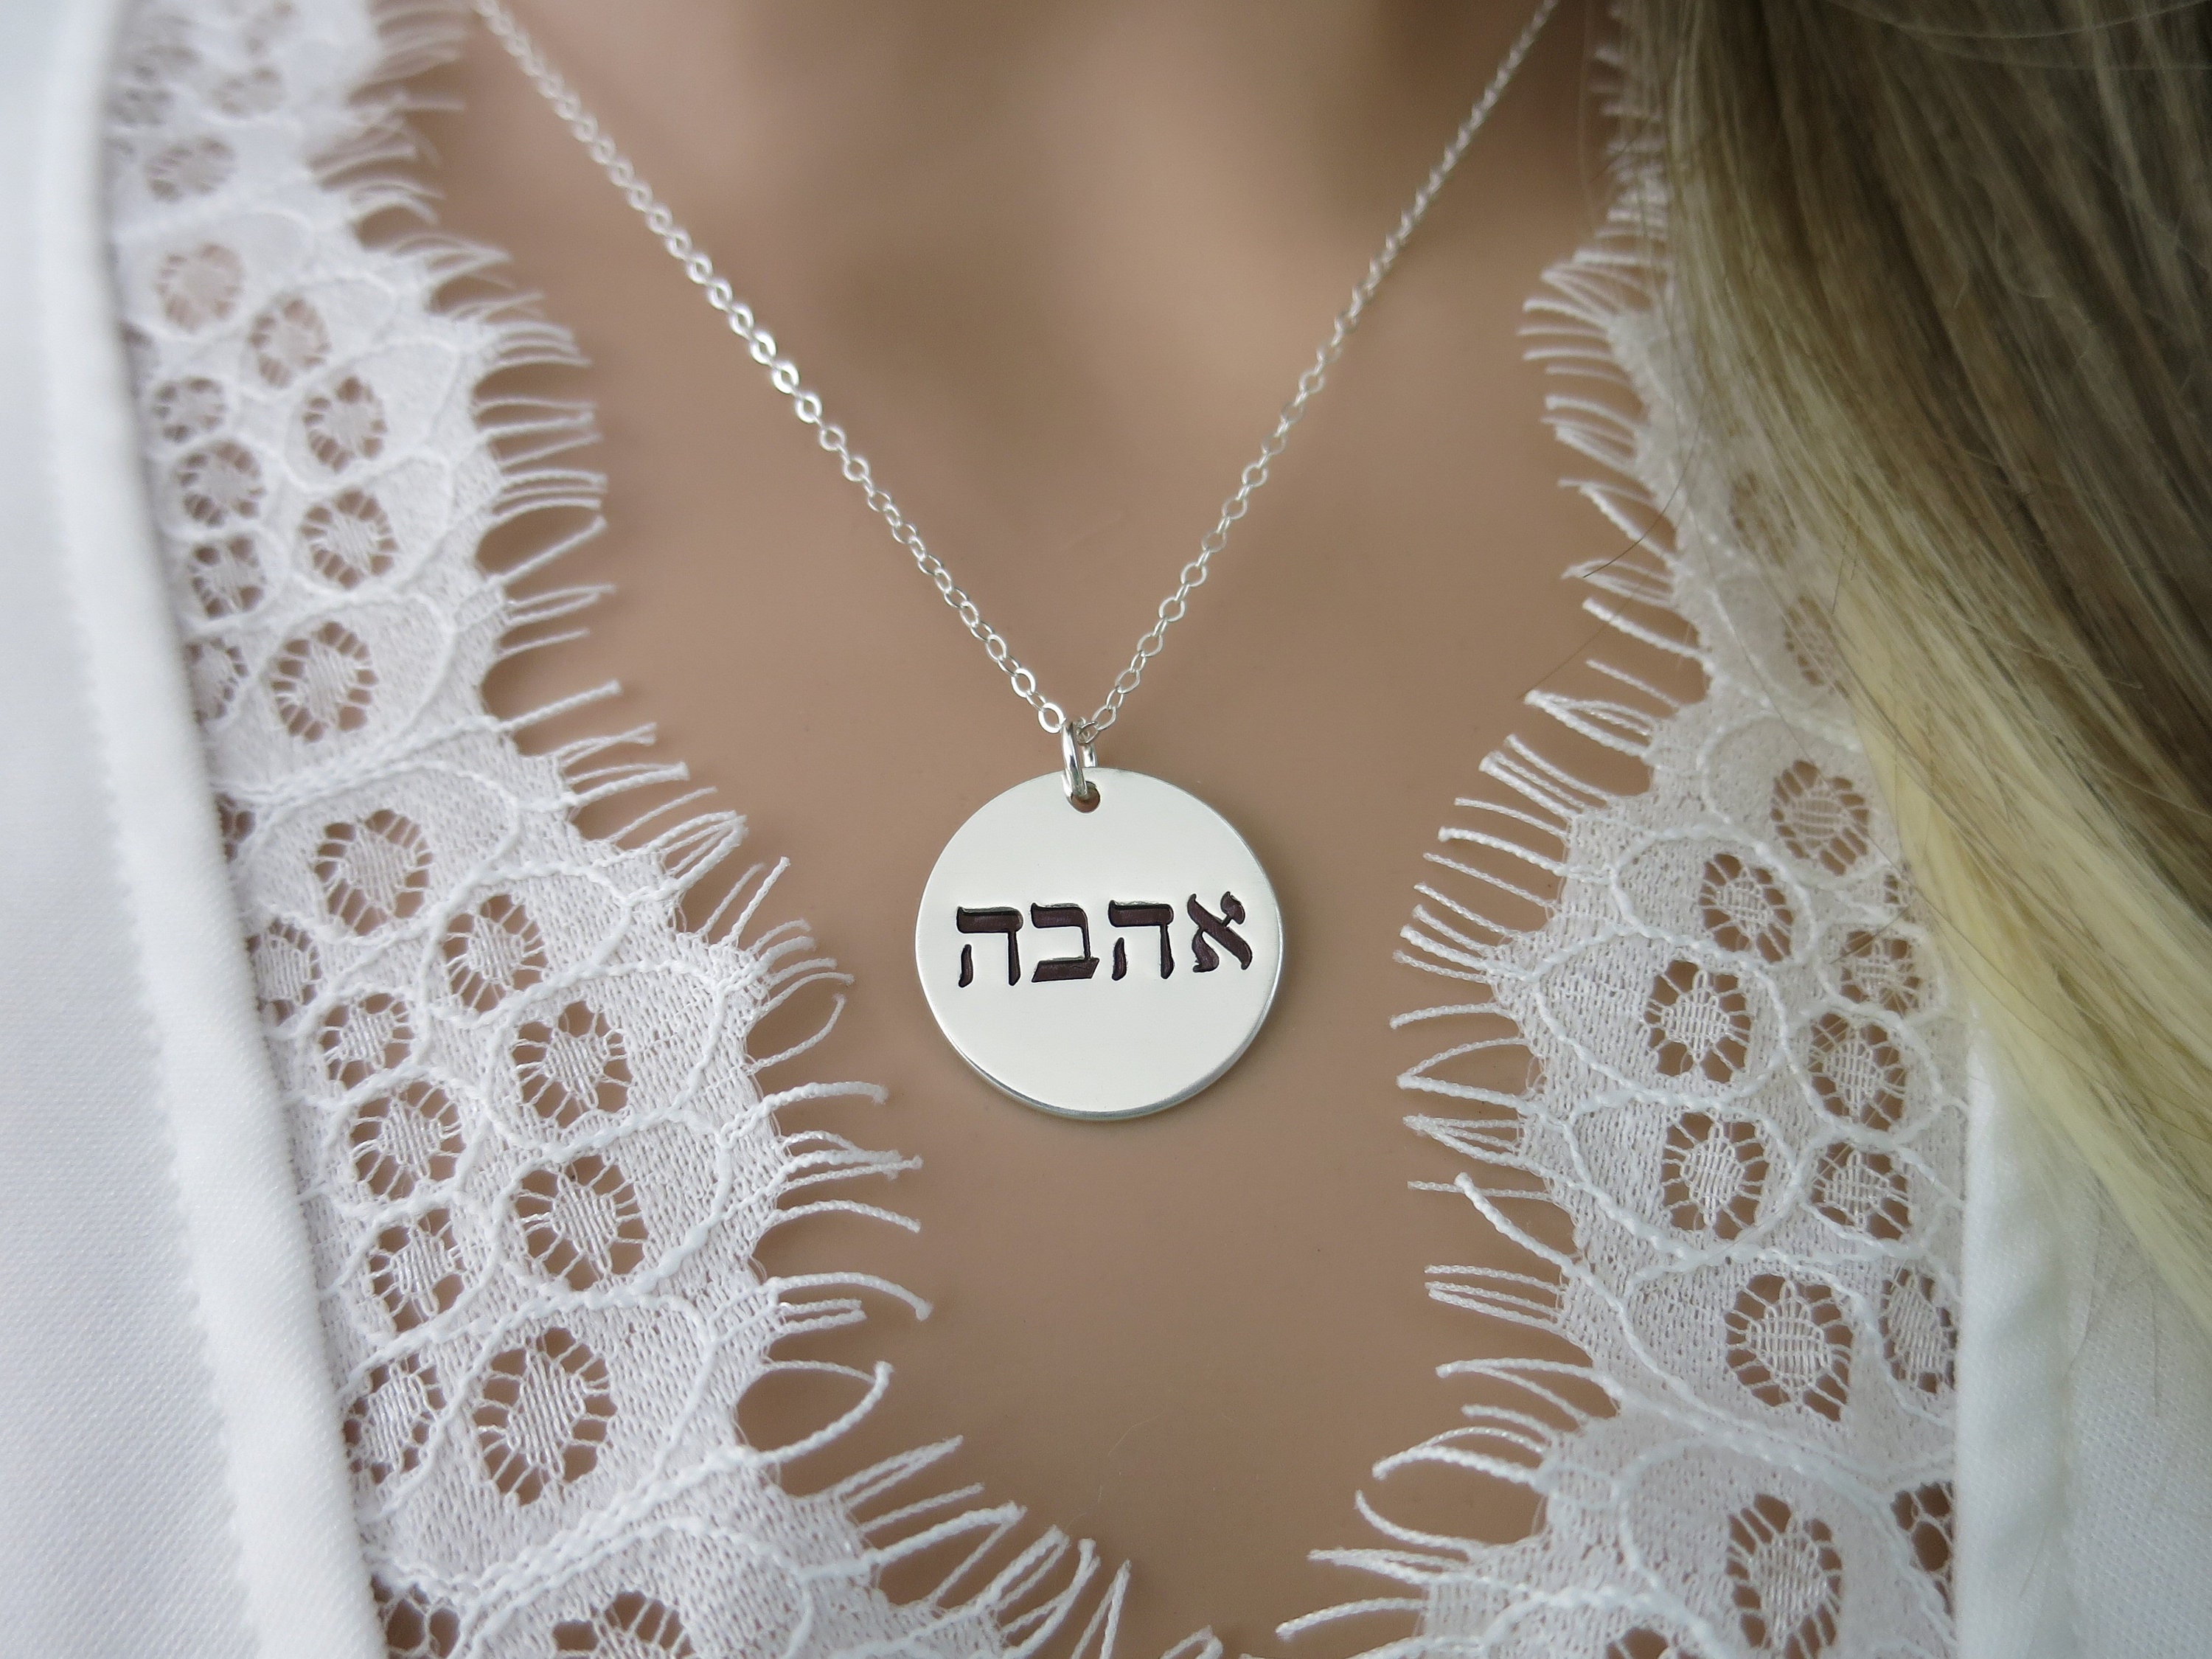 Ahava (Love in Hebrew) Charm Necklace Gold